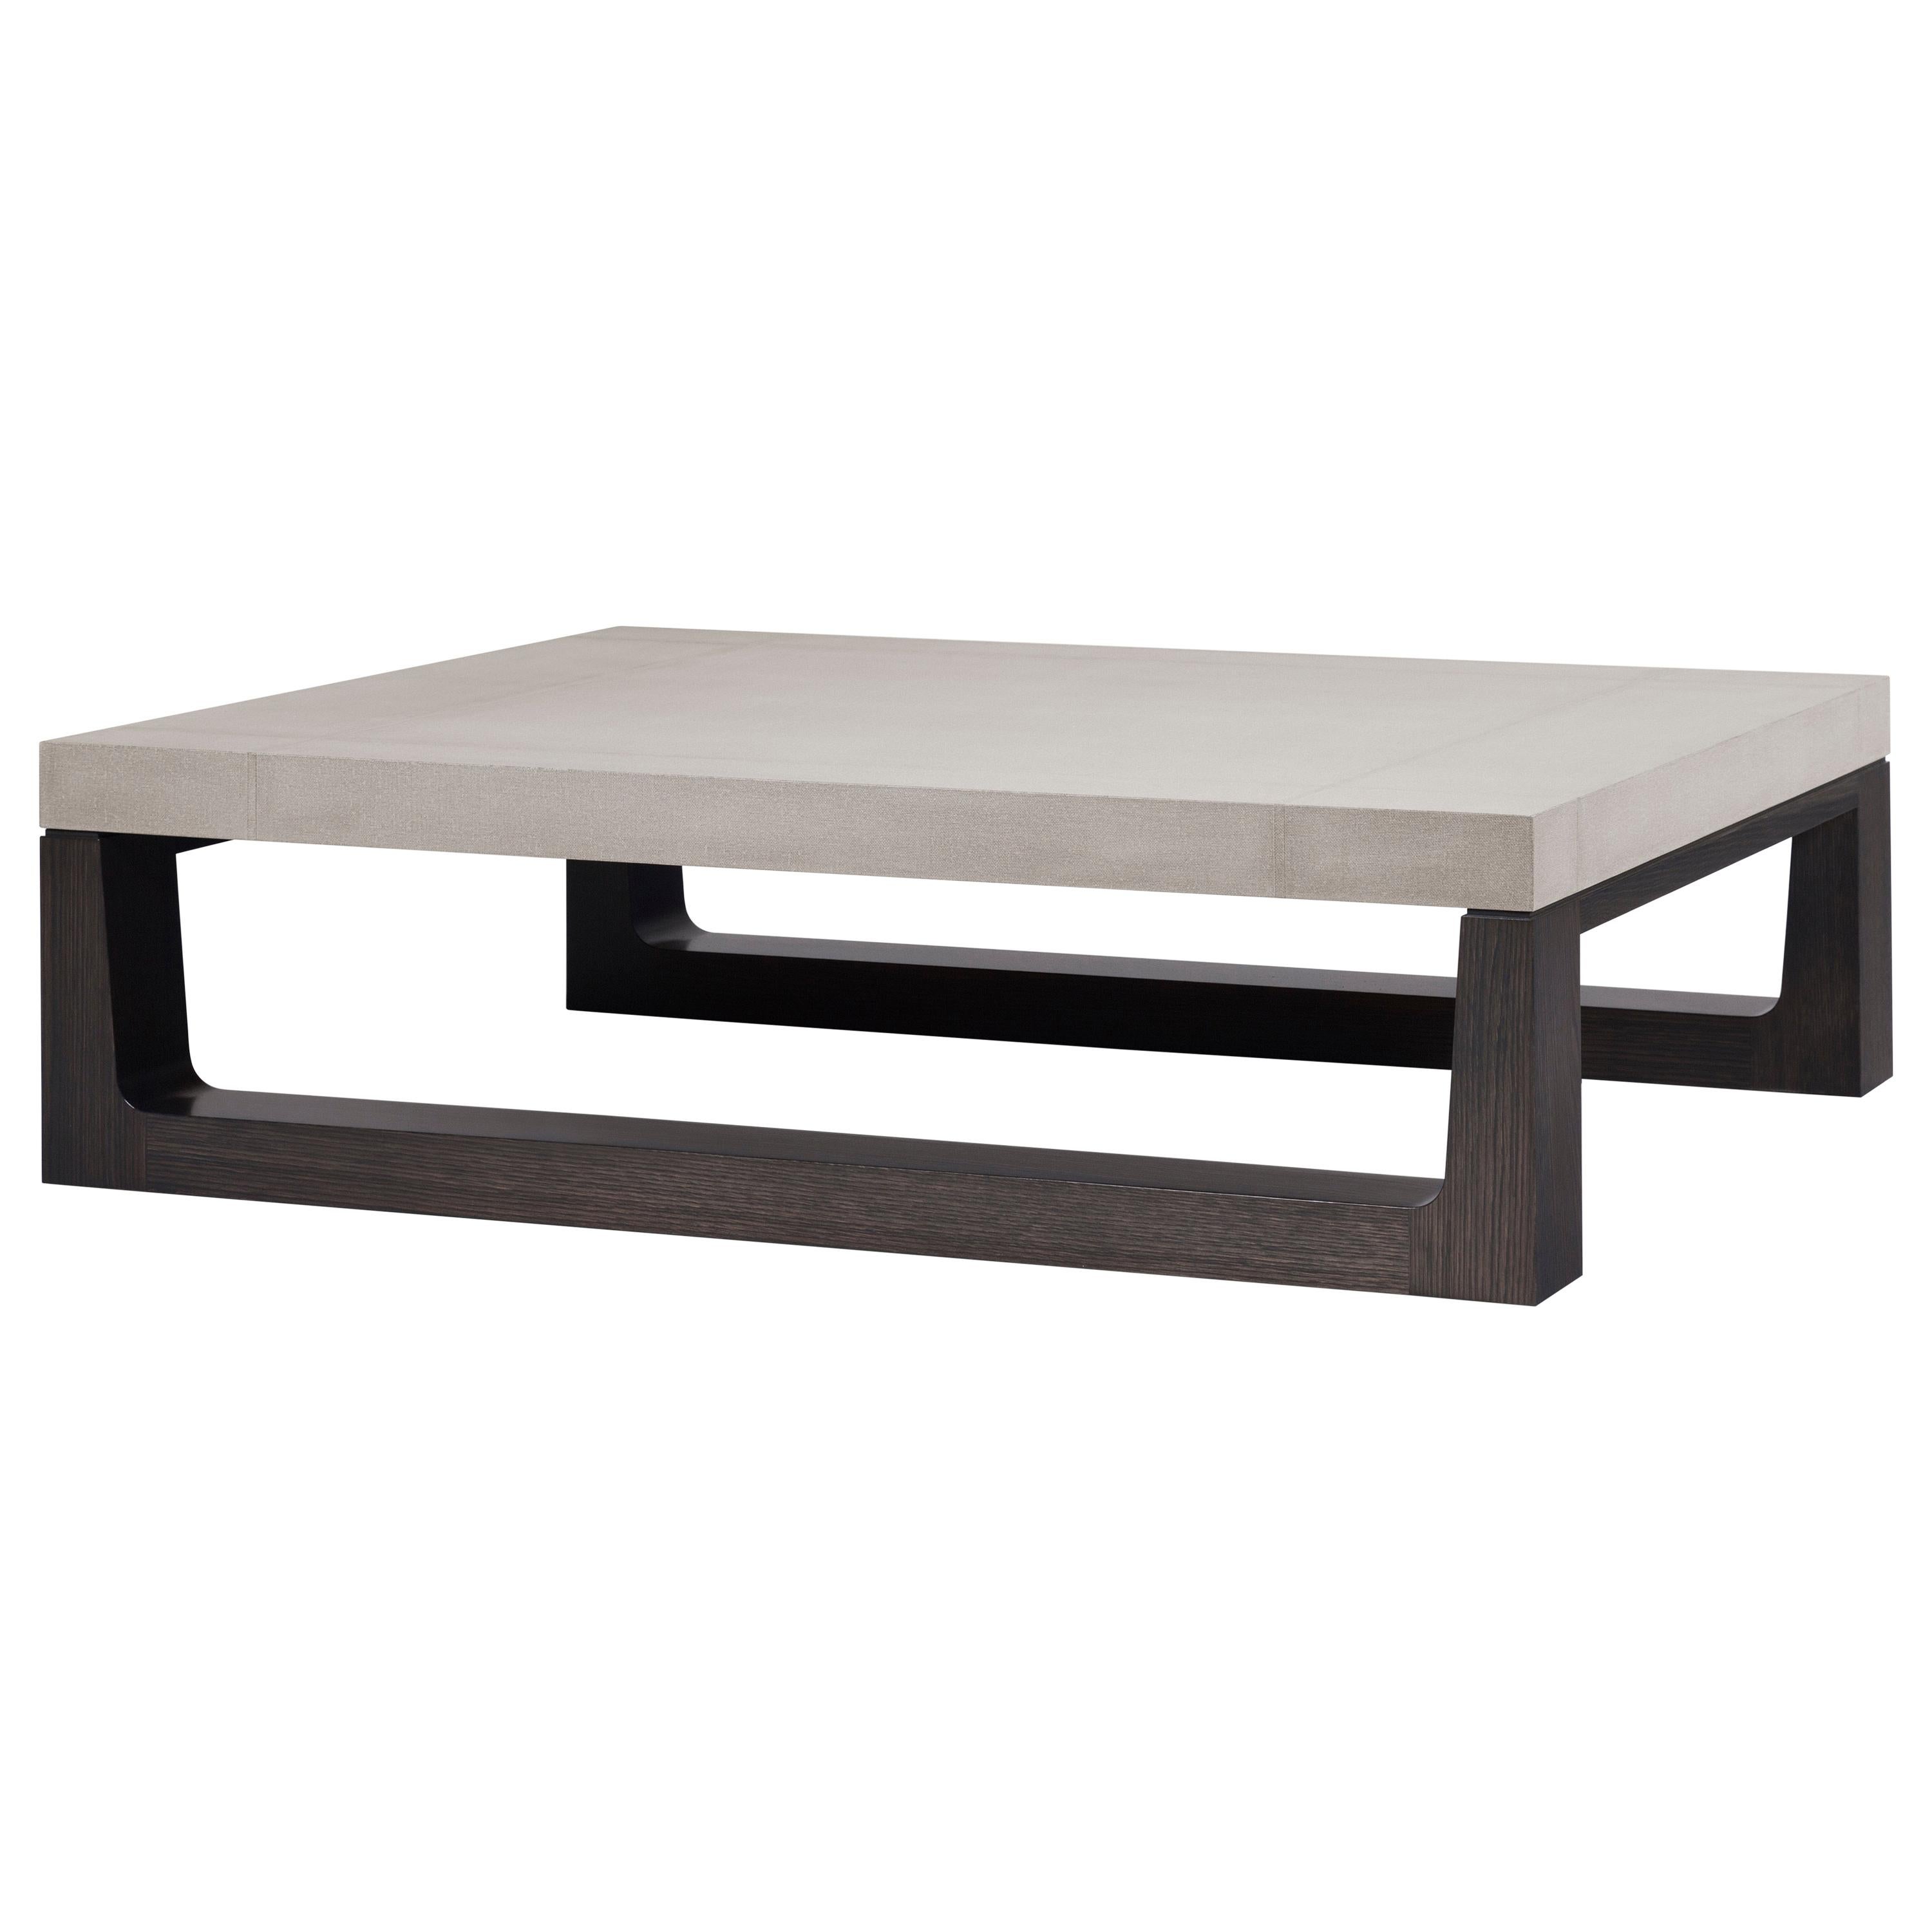 HOLLY HUNT Mojave Cocktail Table without Shelf in Oak and Linen Sandbar Top